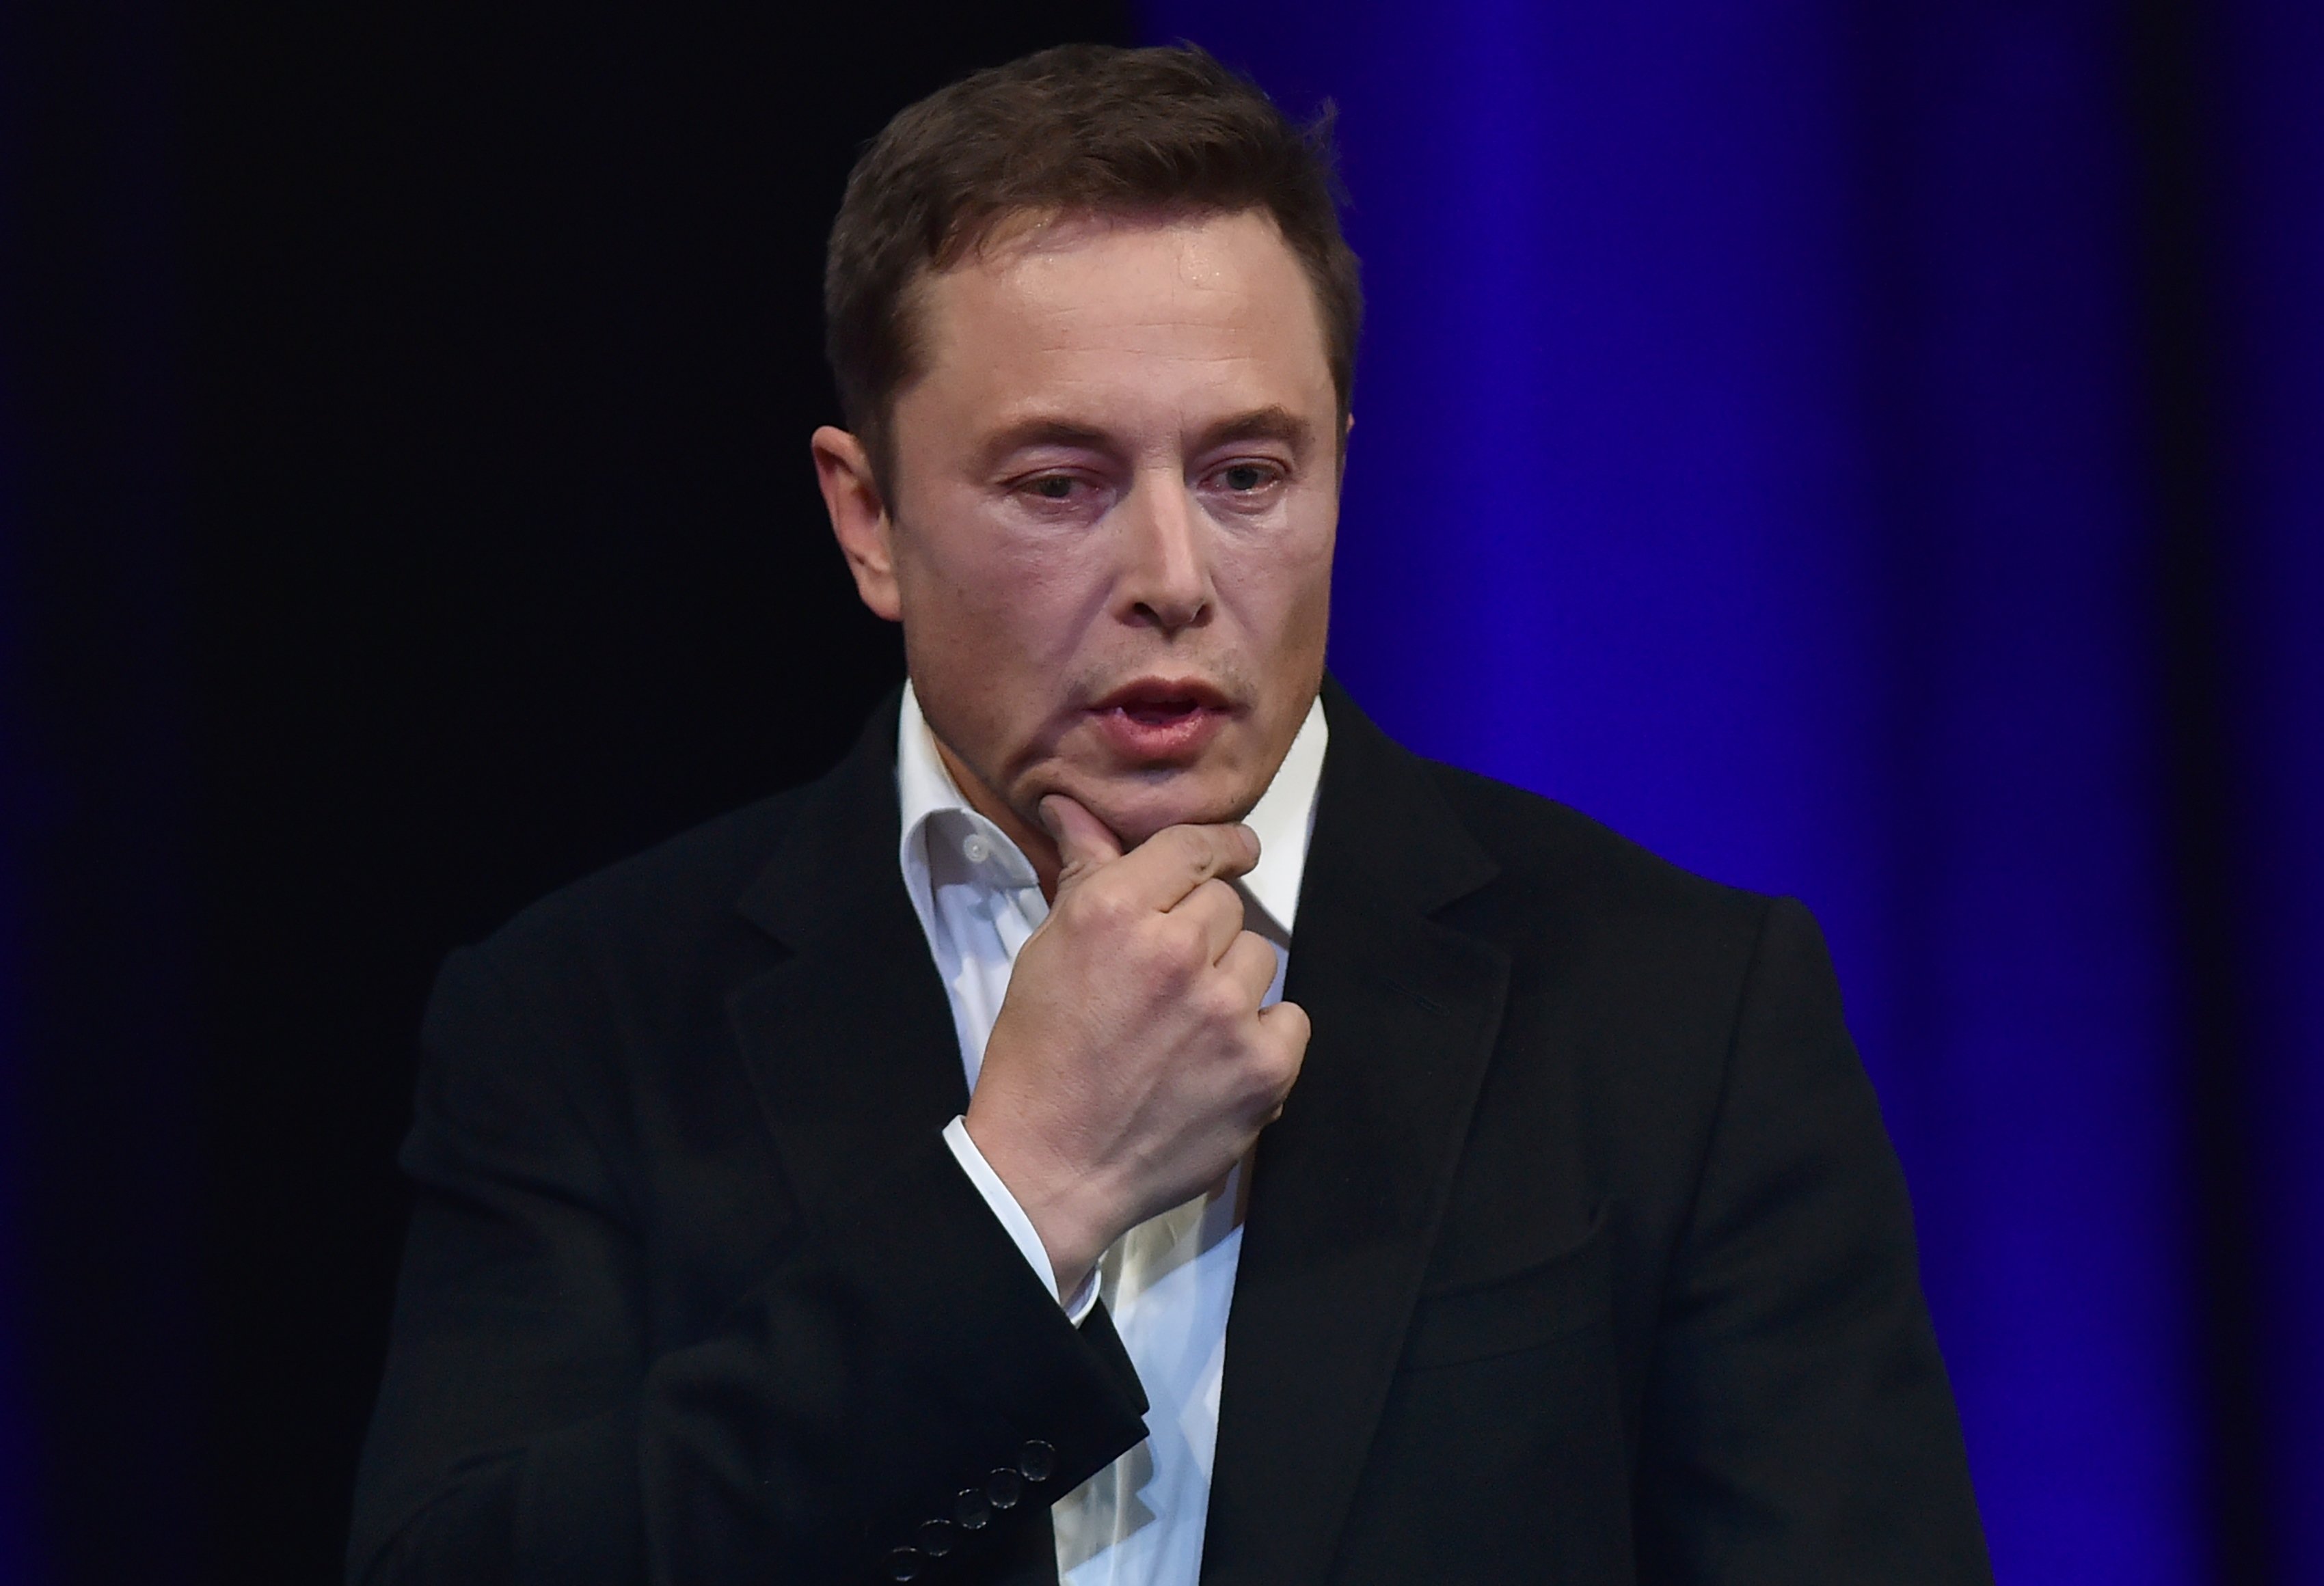 Elon Musk overtakes Amazon's Jeff Bezos to become world's wealthiest person